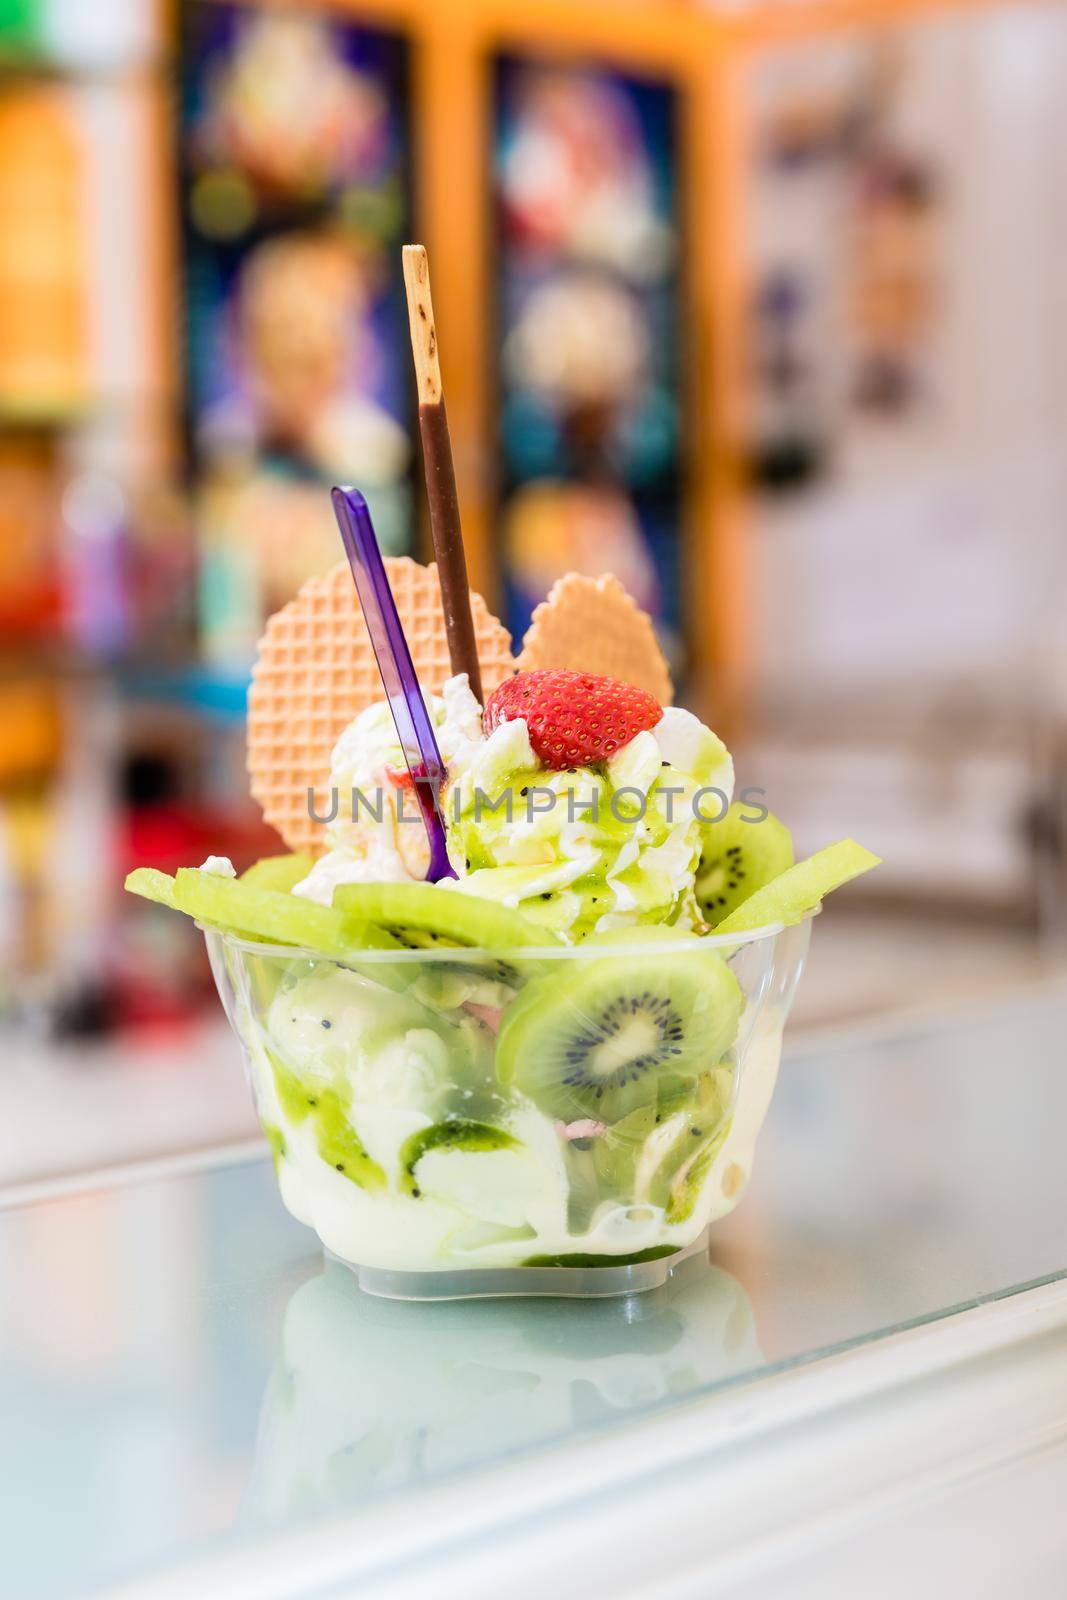 Sundae made of vanilla ice and kiwi fruit on the counter of parlor